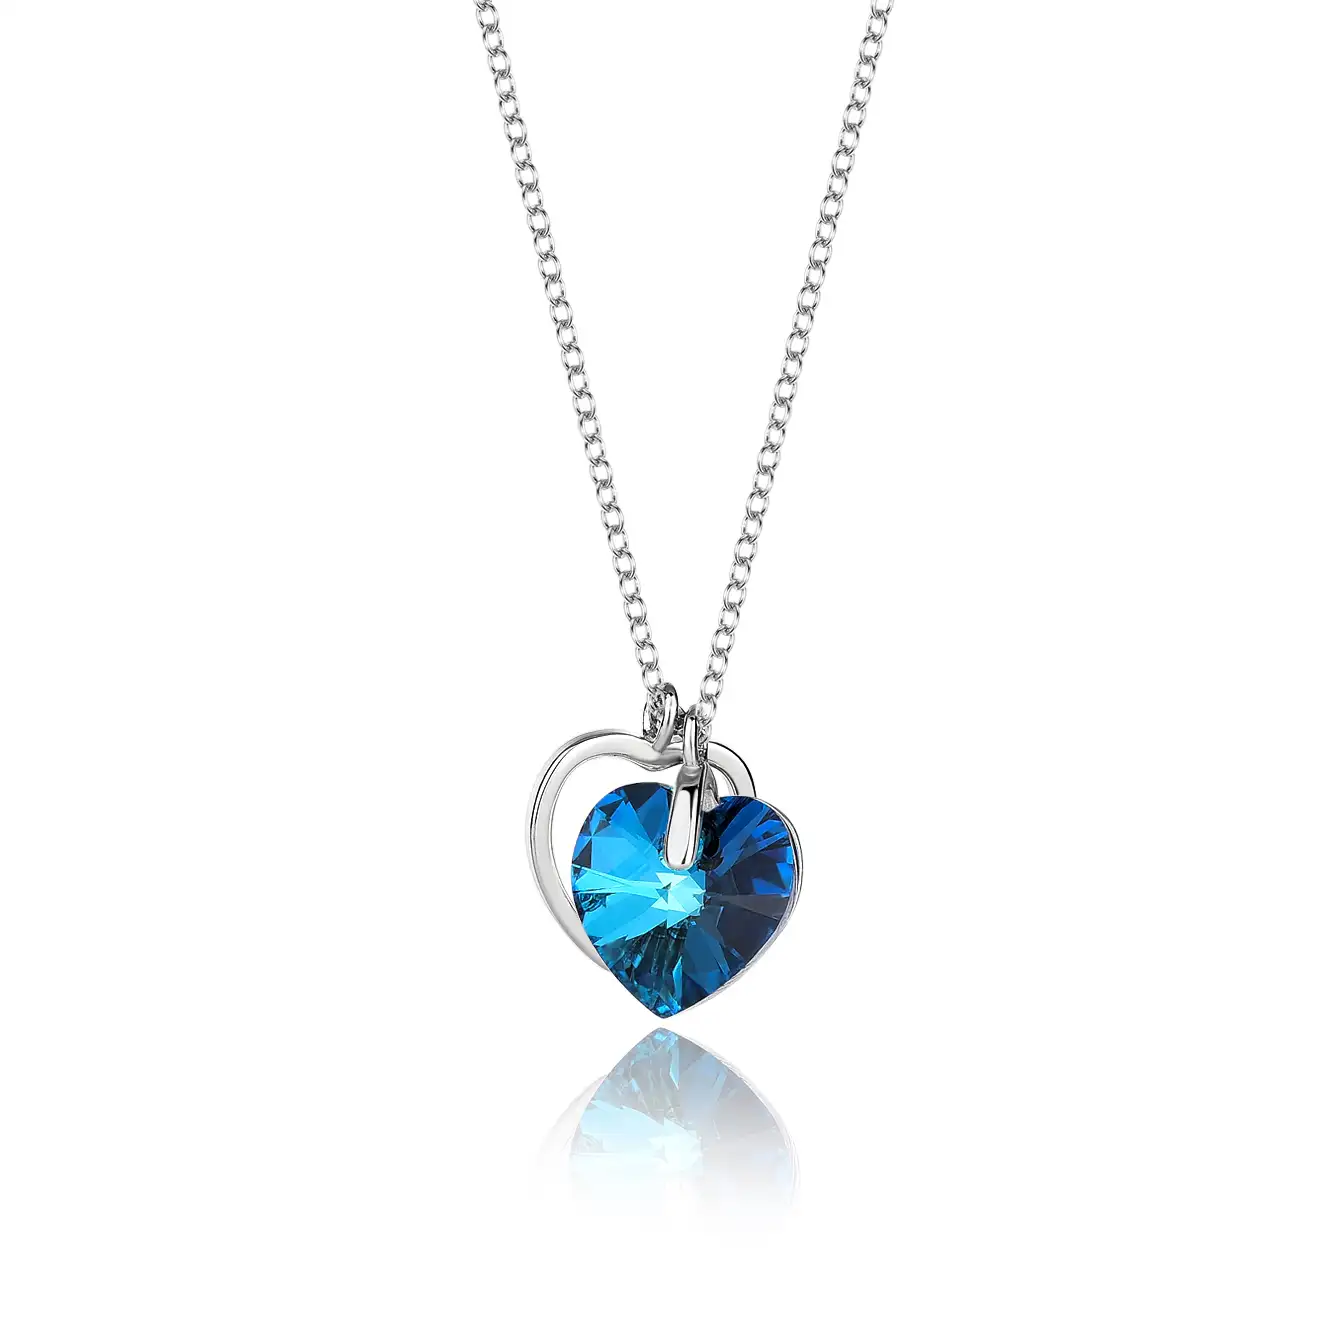 Crystals from Swarovski Love Heart Cubic Zirconia Pendant Necklace 80200072